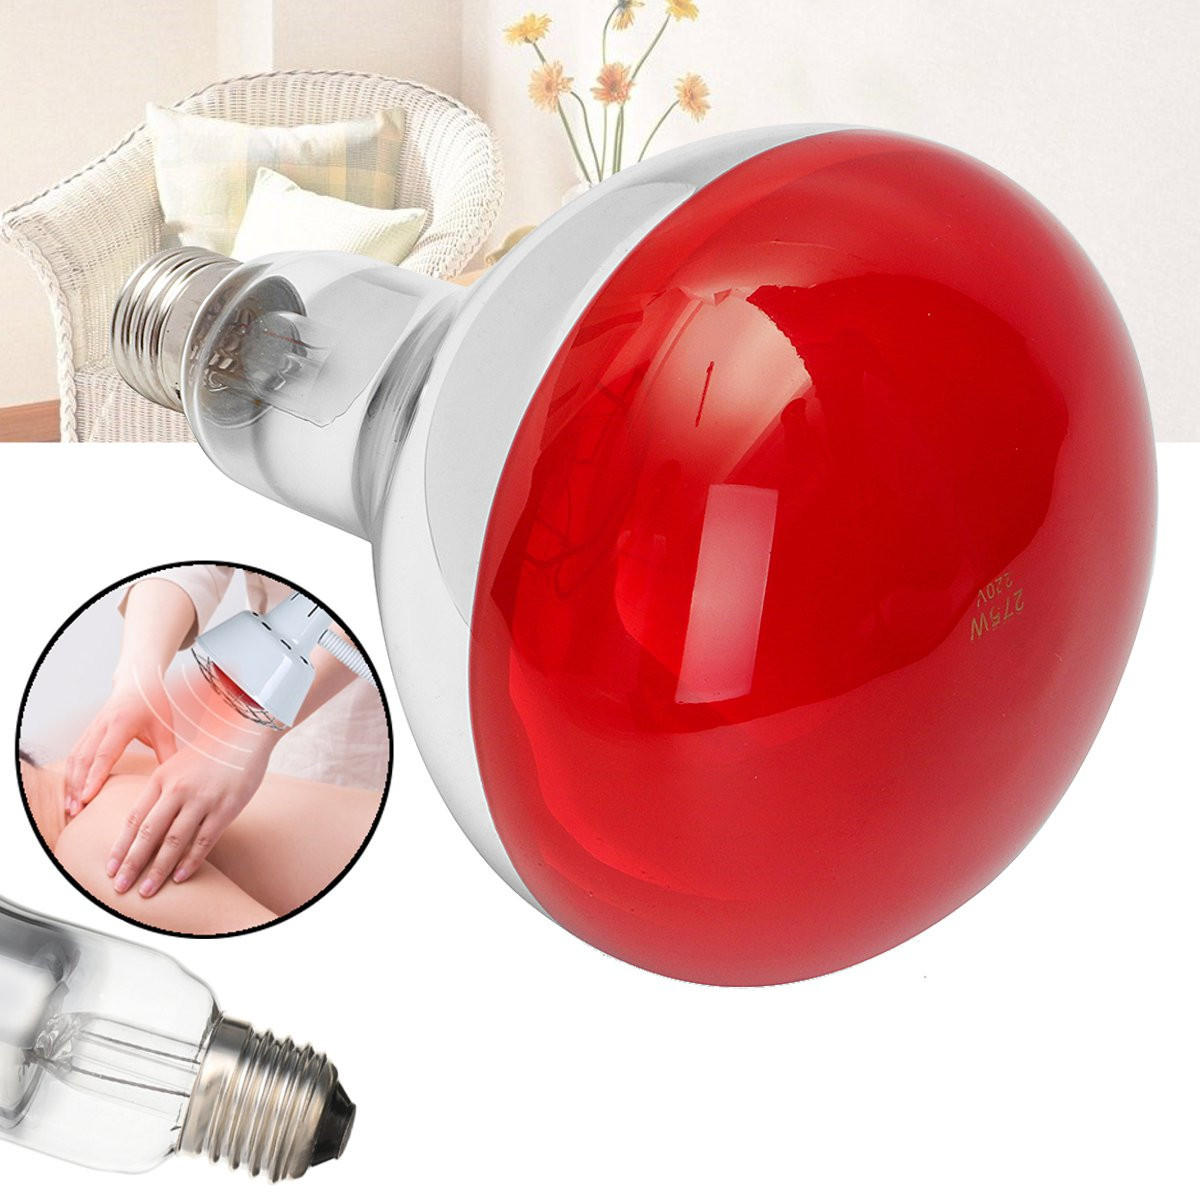 

AC220V E27 275W Infrared Floor Stand Heat Lamp Bulb for Health Pain Relief Therapy